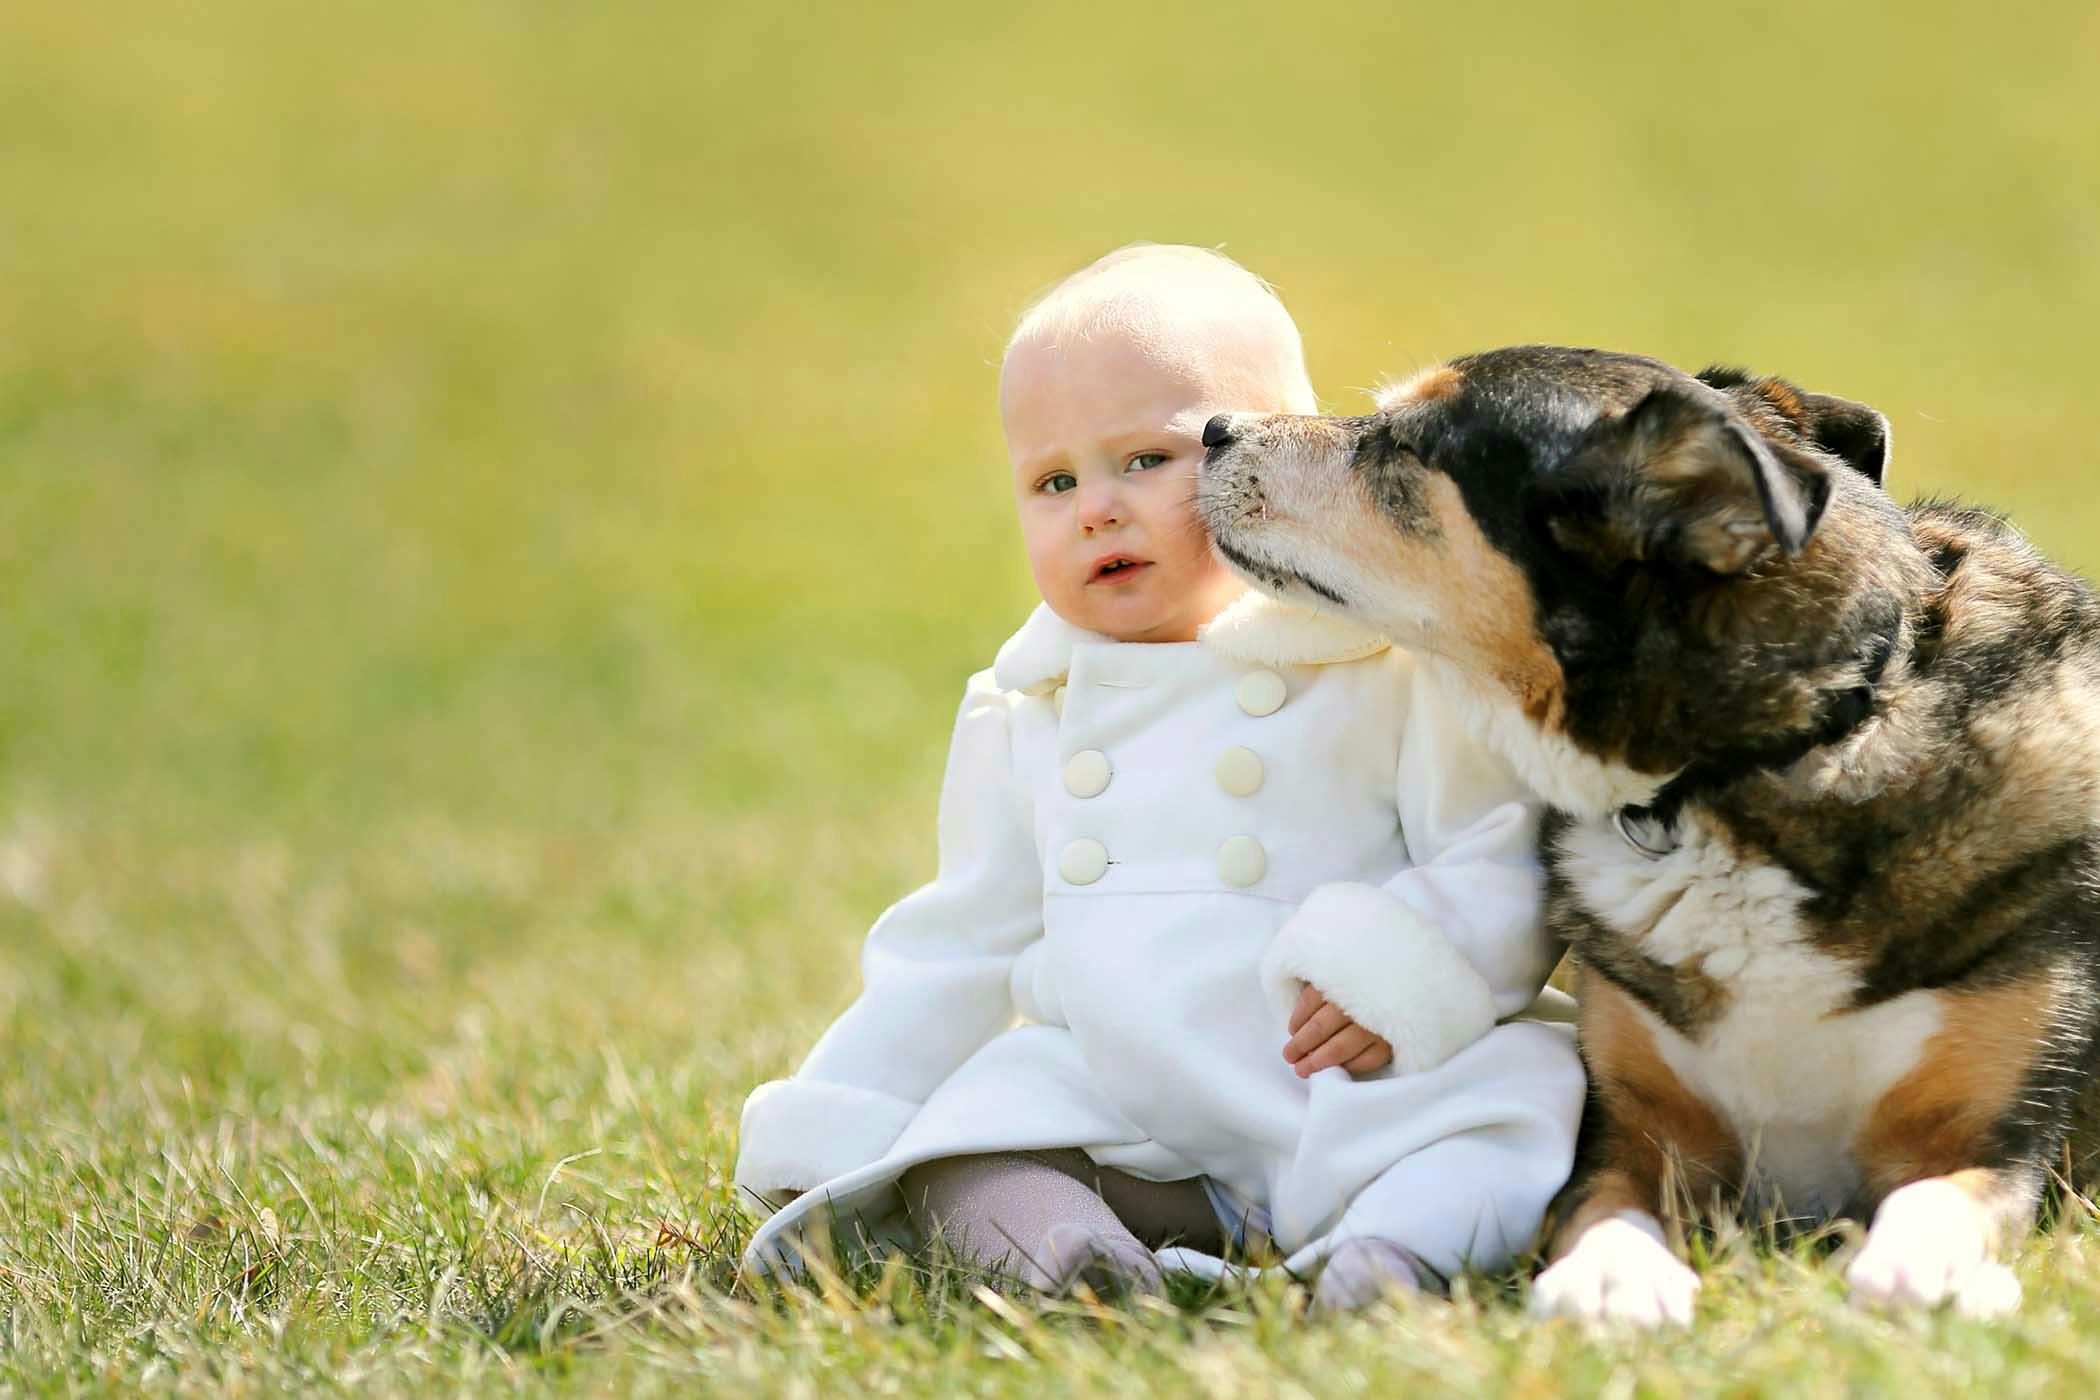 How to Train Your Dog to Accept a Baby